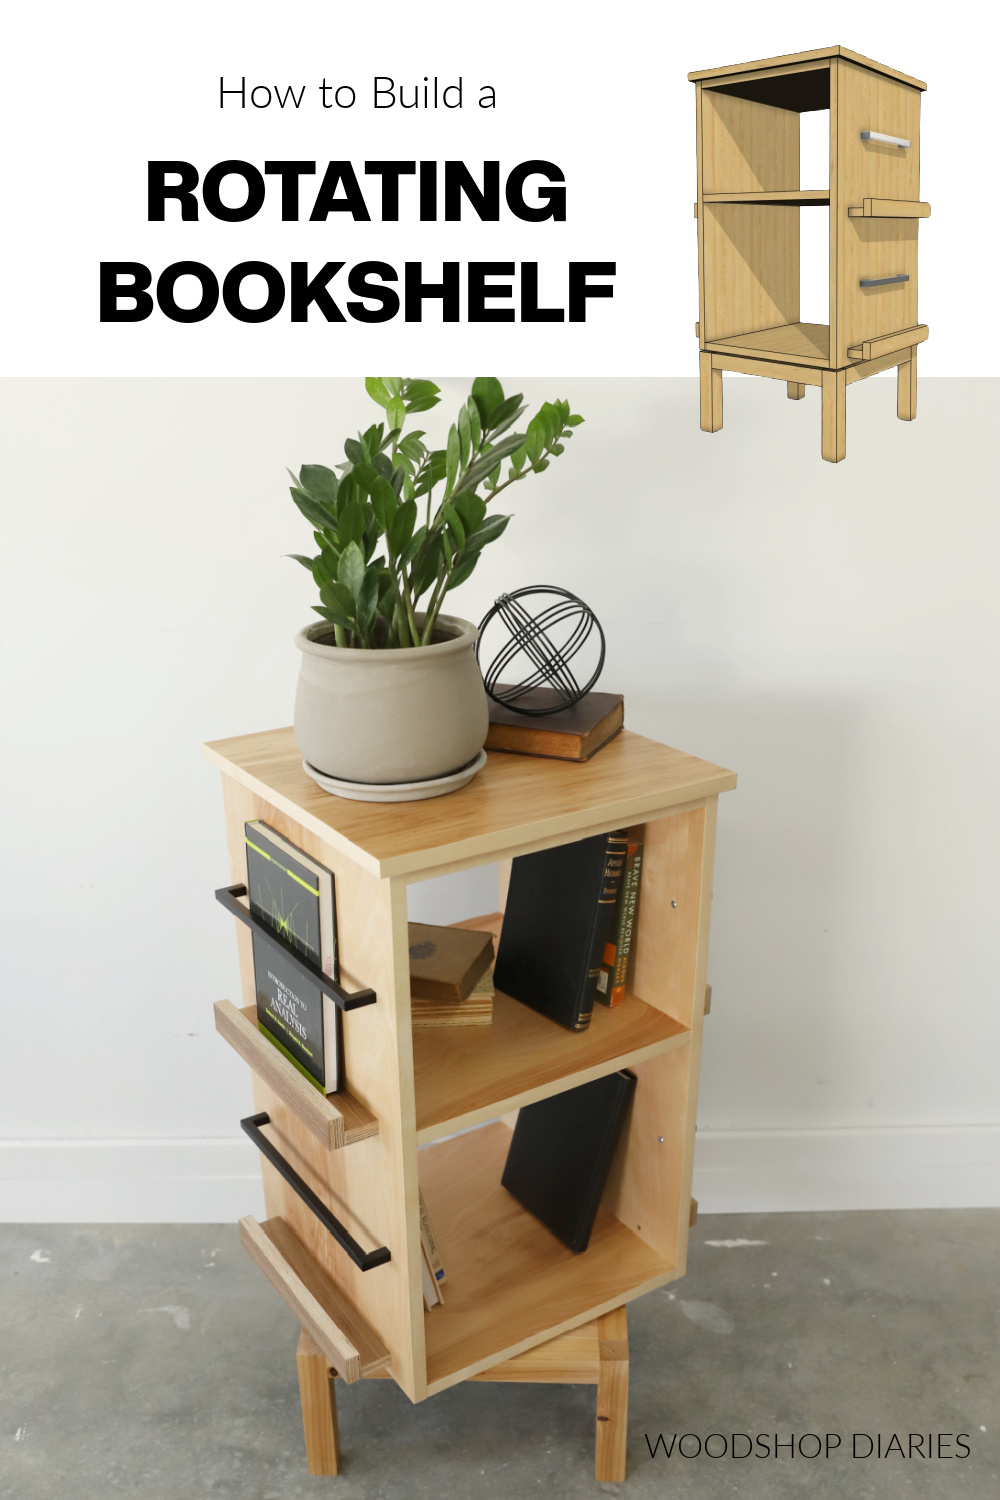 Pinterest collage showing diagram of bookshelf at top and finished 4 sided rotating bookshelf at bottom with text "how to build a rotating bookshelf"